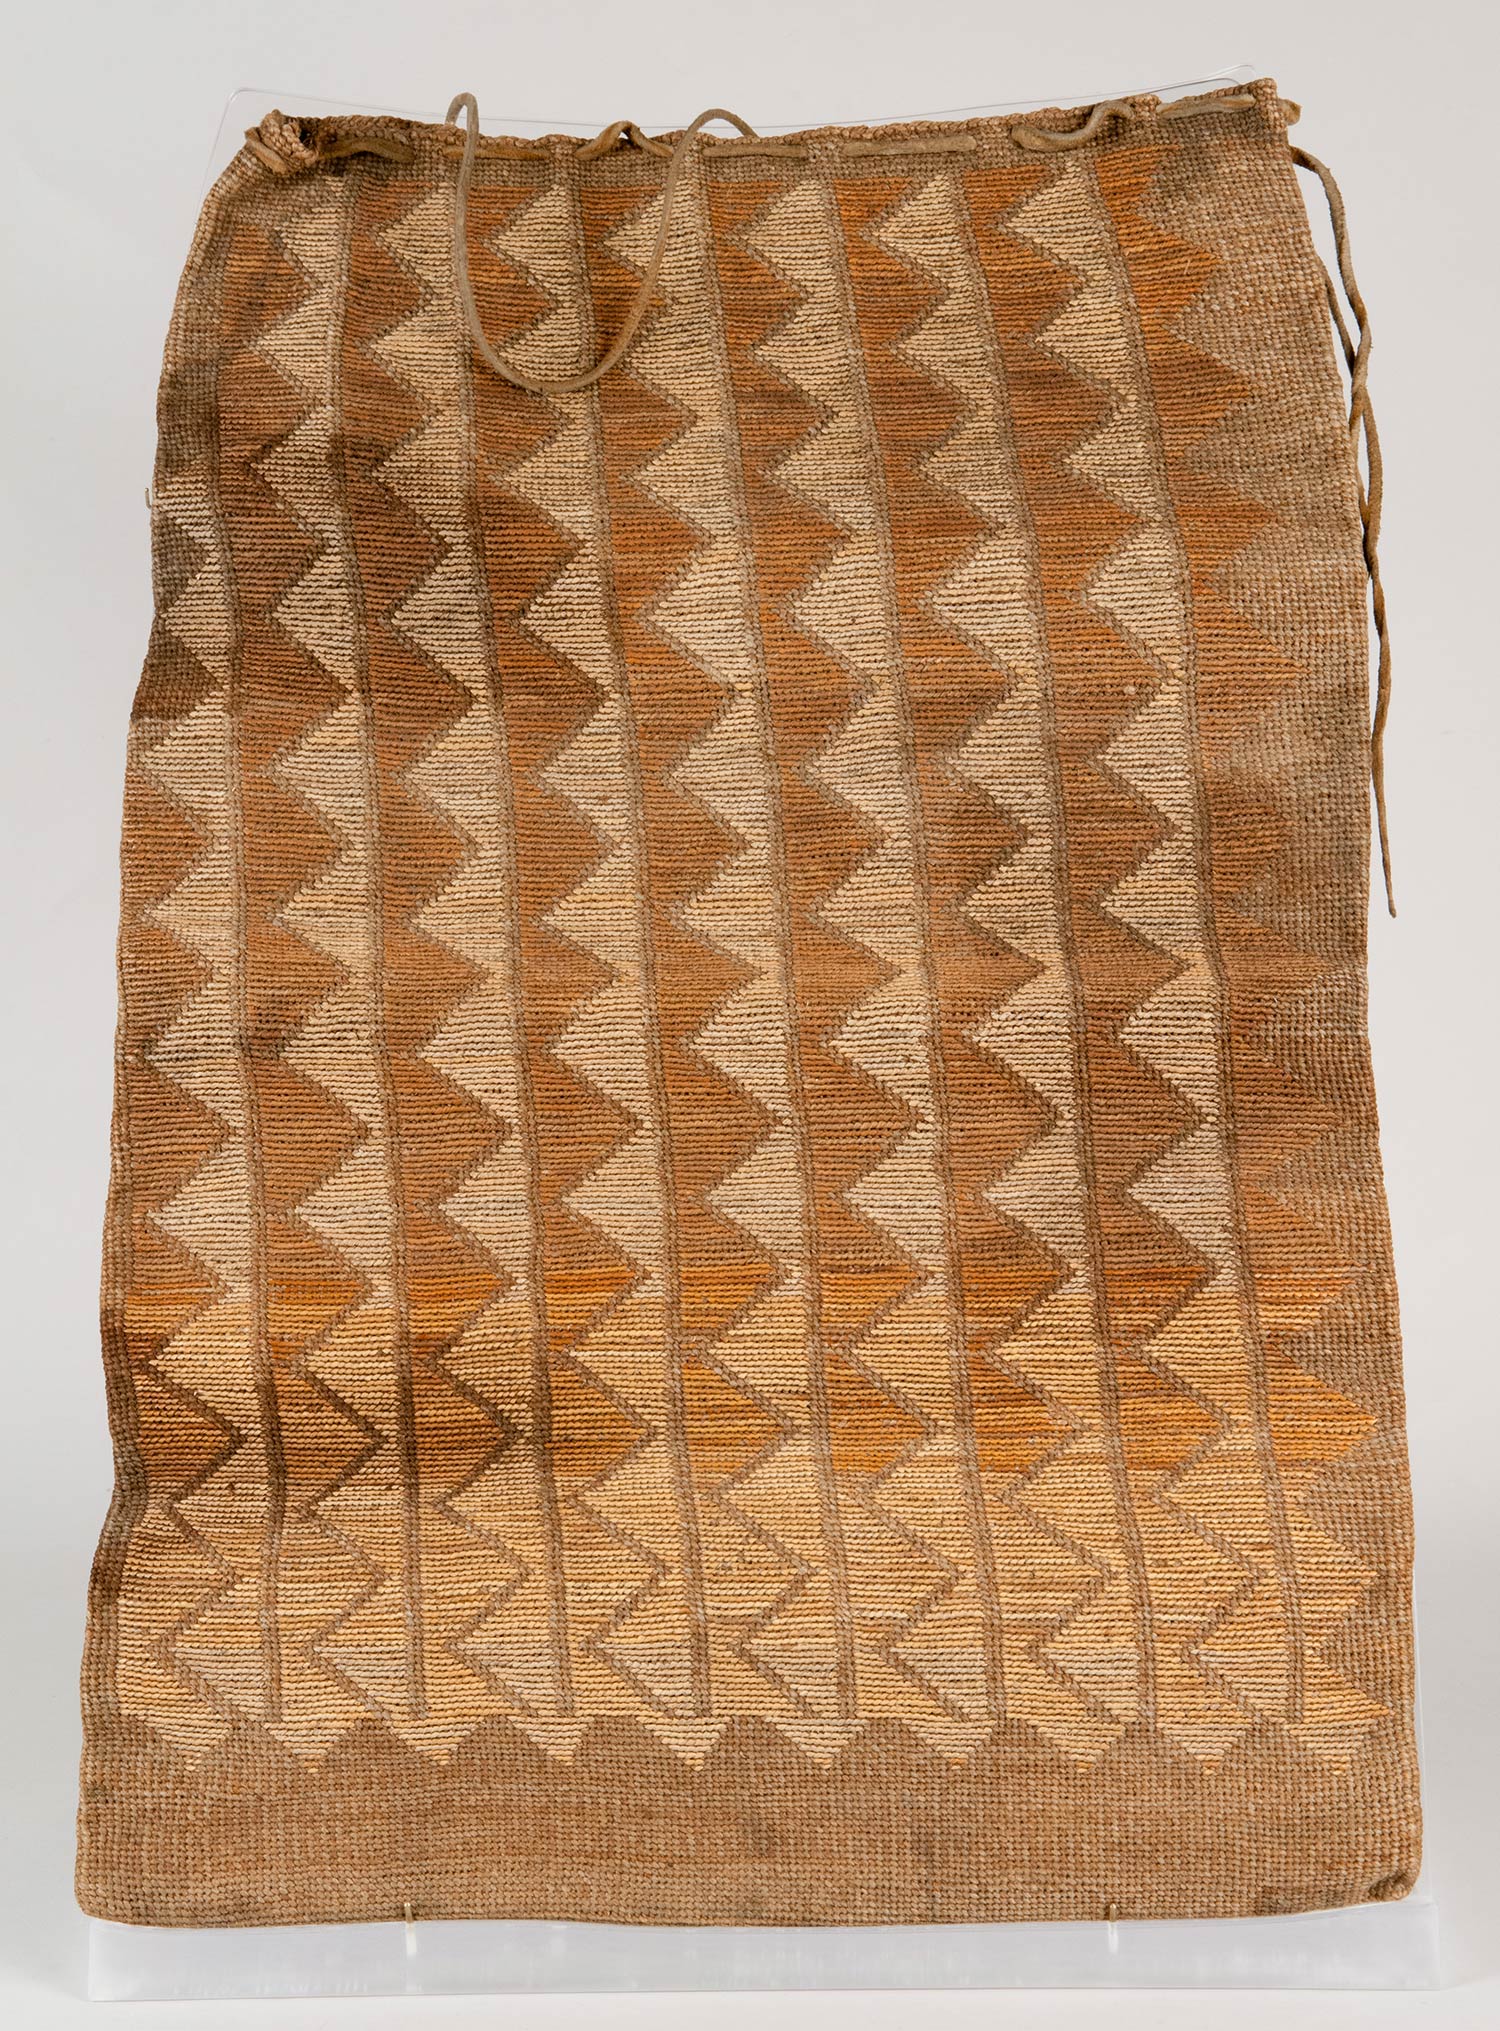 Vertically woven, Large, flat cornhusk bag. Constructed using plain twining of Indian hemp with dyed and undyed cornhusk false embroidery. Geometric hourglass figures featured on both sides.